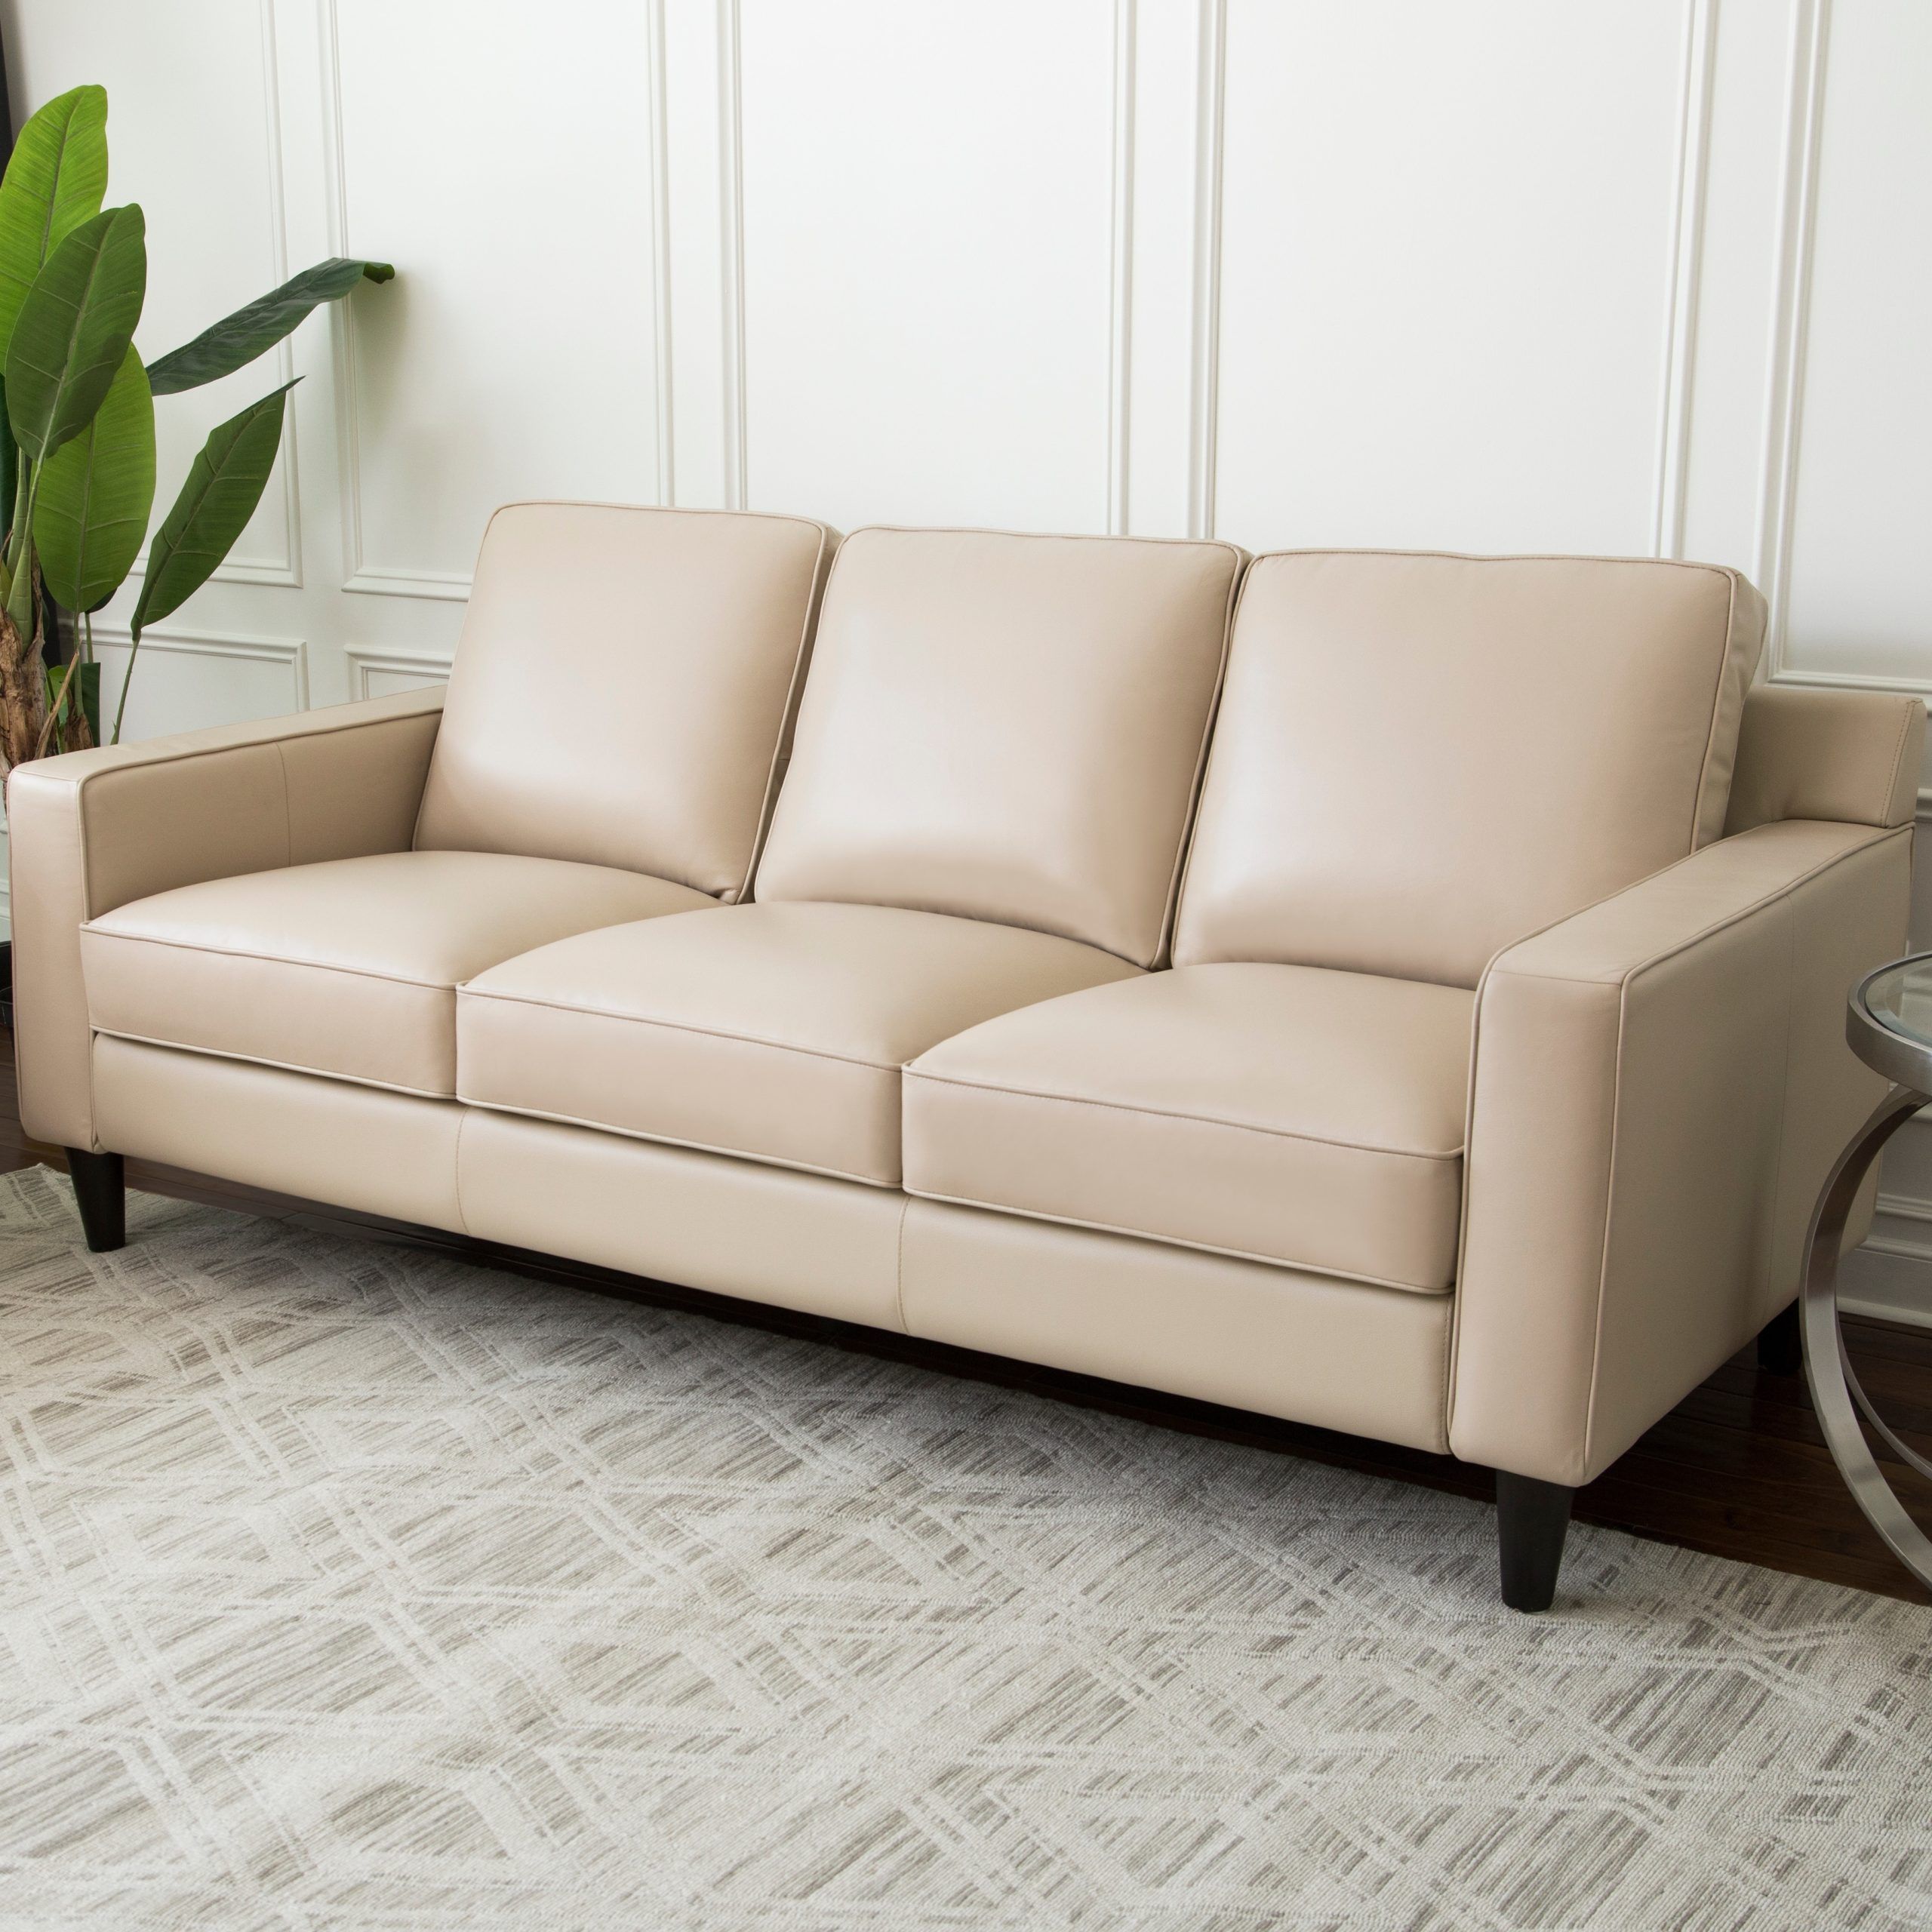 Recent Kathleen Cream Leather 91 Sofa Living Spaces With Regard To Sofas In Cream (View 14 of 15)